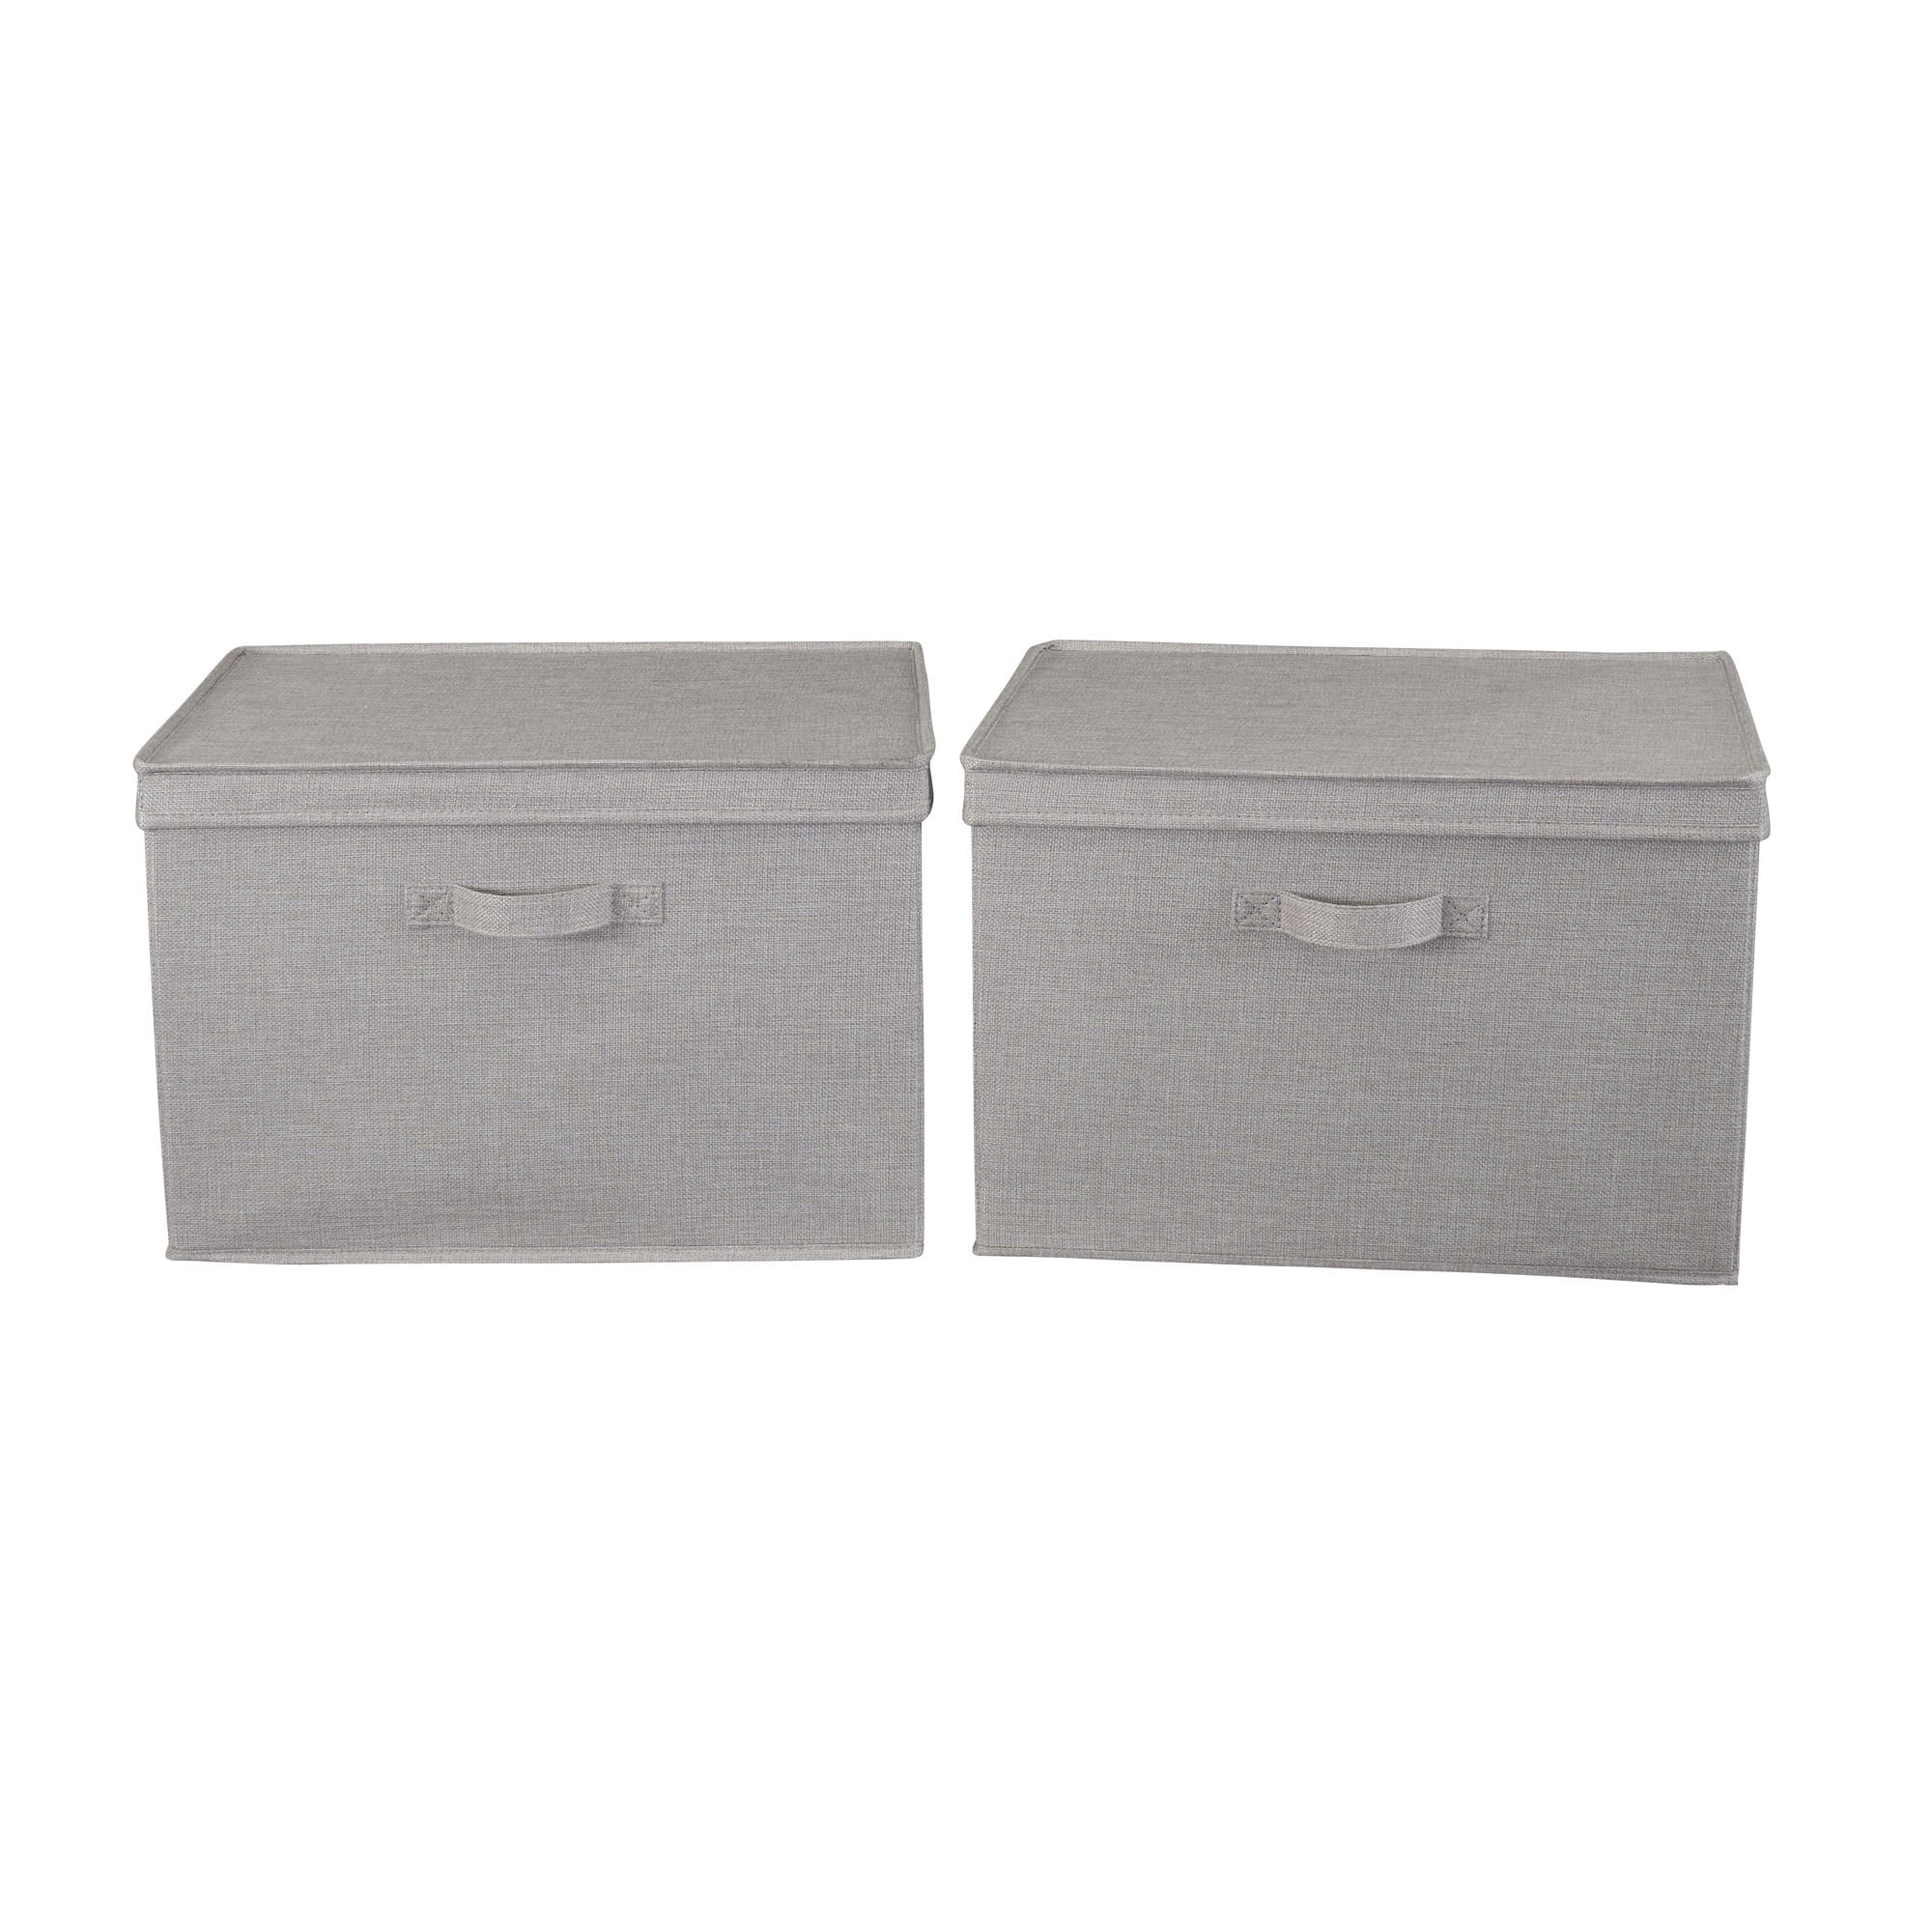 Lavex 19 13/16 x 14 x 12 15/16 Gray Medium Stackable Industrial Tote /  Storage Box with Attached Lid